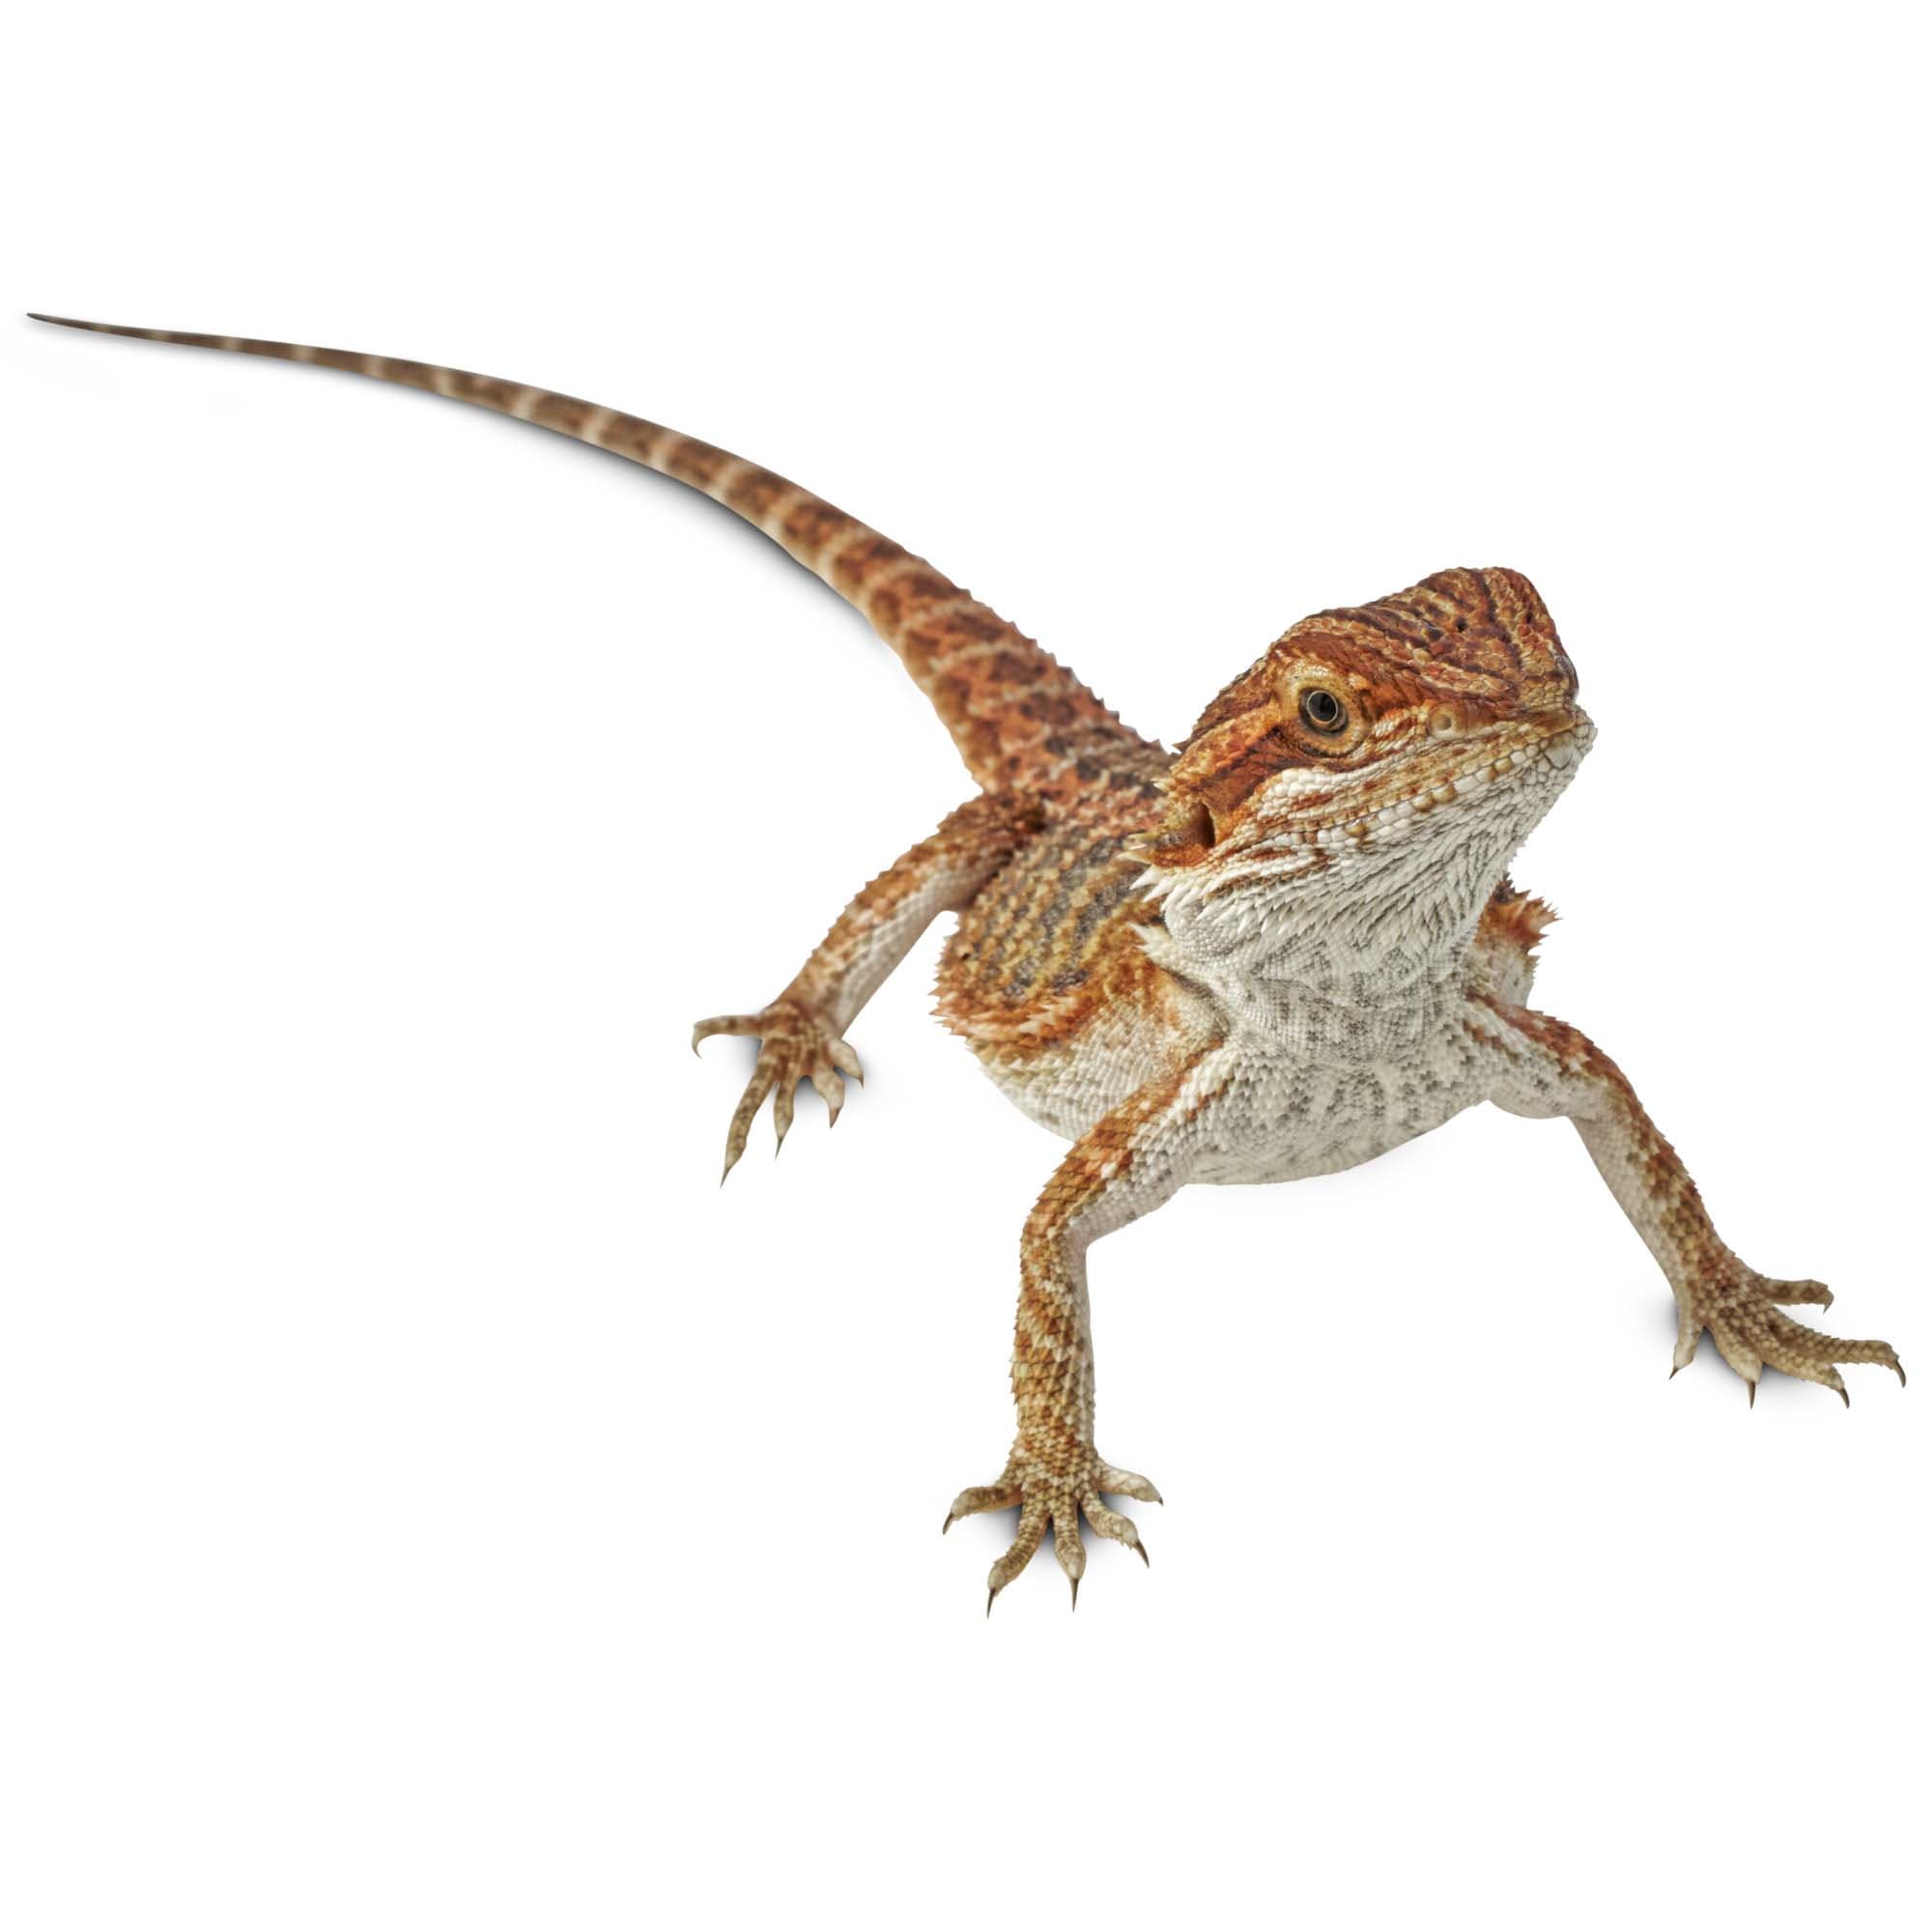 Bearded Dragons for Sale | Buy Live Bearded Dragons for Sale | Petco